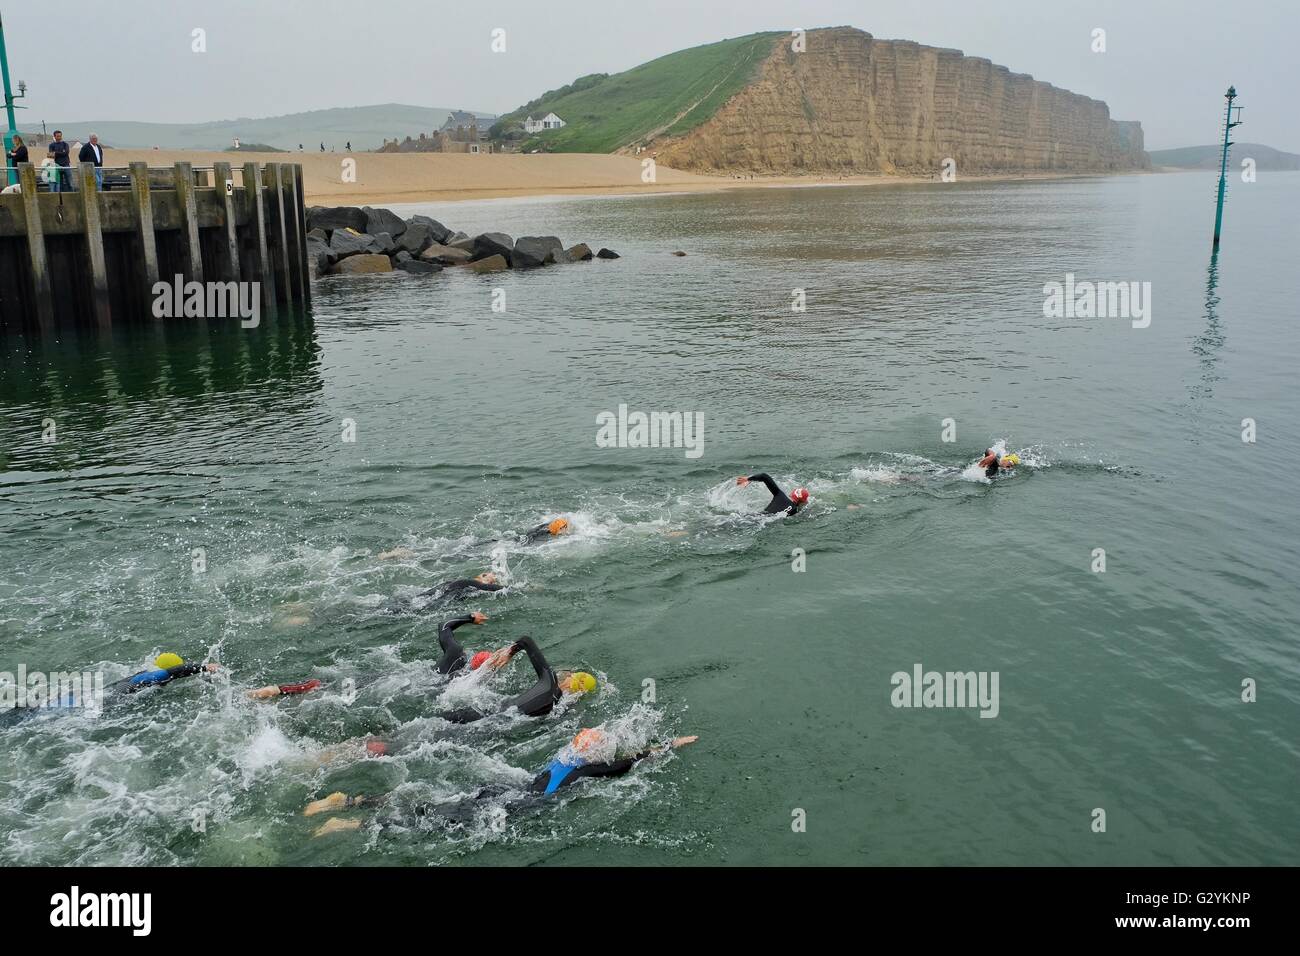 West Bay, Dorset, UK. 5 June 2016. Competitors swim out of West Bay Harbour on the first stage of the inaugural West Bay Triathlon. After swimming along Dorset's Jurassic coast competitors have a short run to collect their bikes then cycle through the landscape made famous in Thomas Hardy's novels before completing the final running section. Credit:  Tom Corban/Alamy Live News Stock Photo